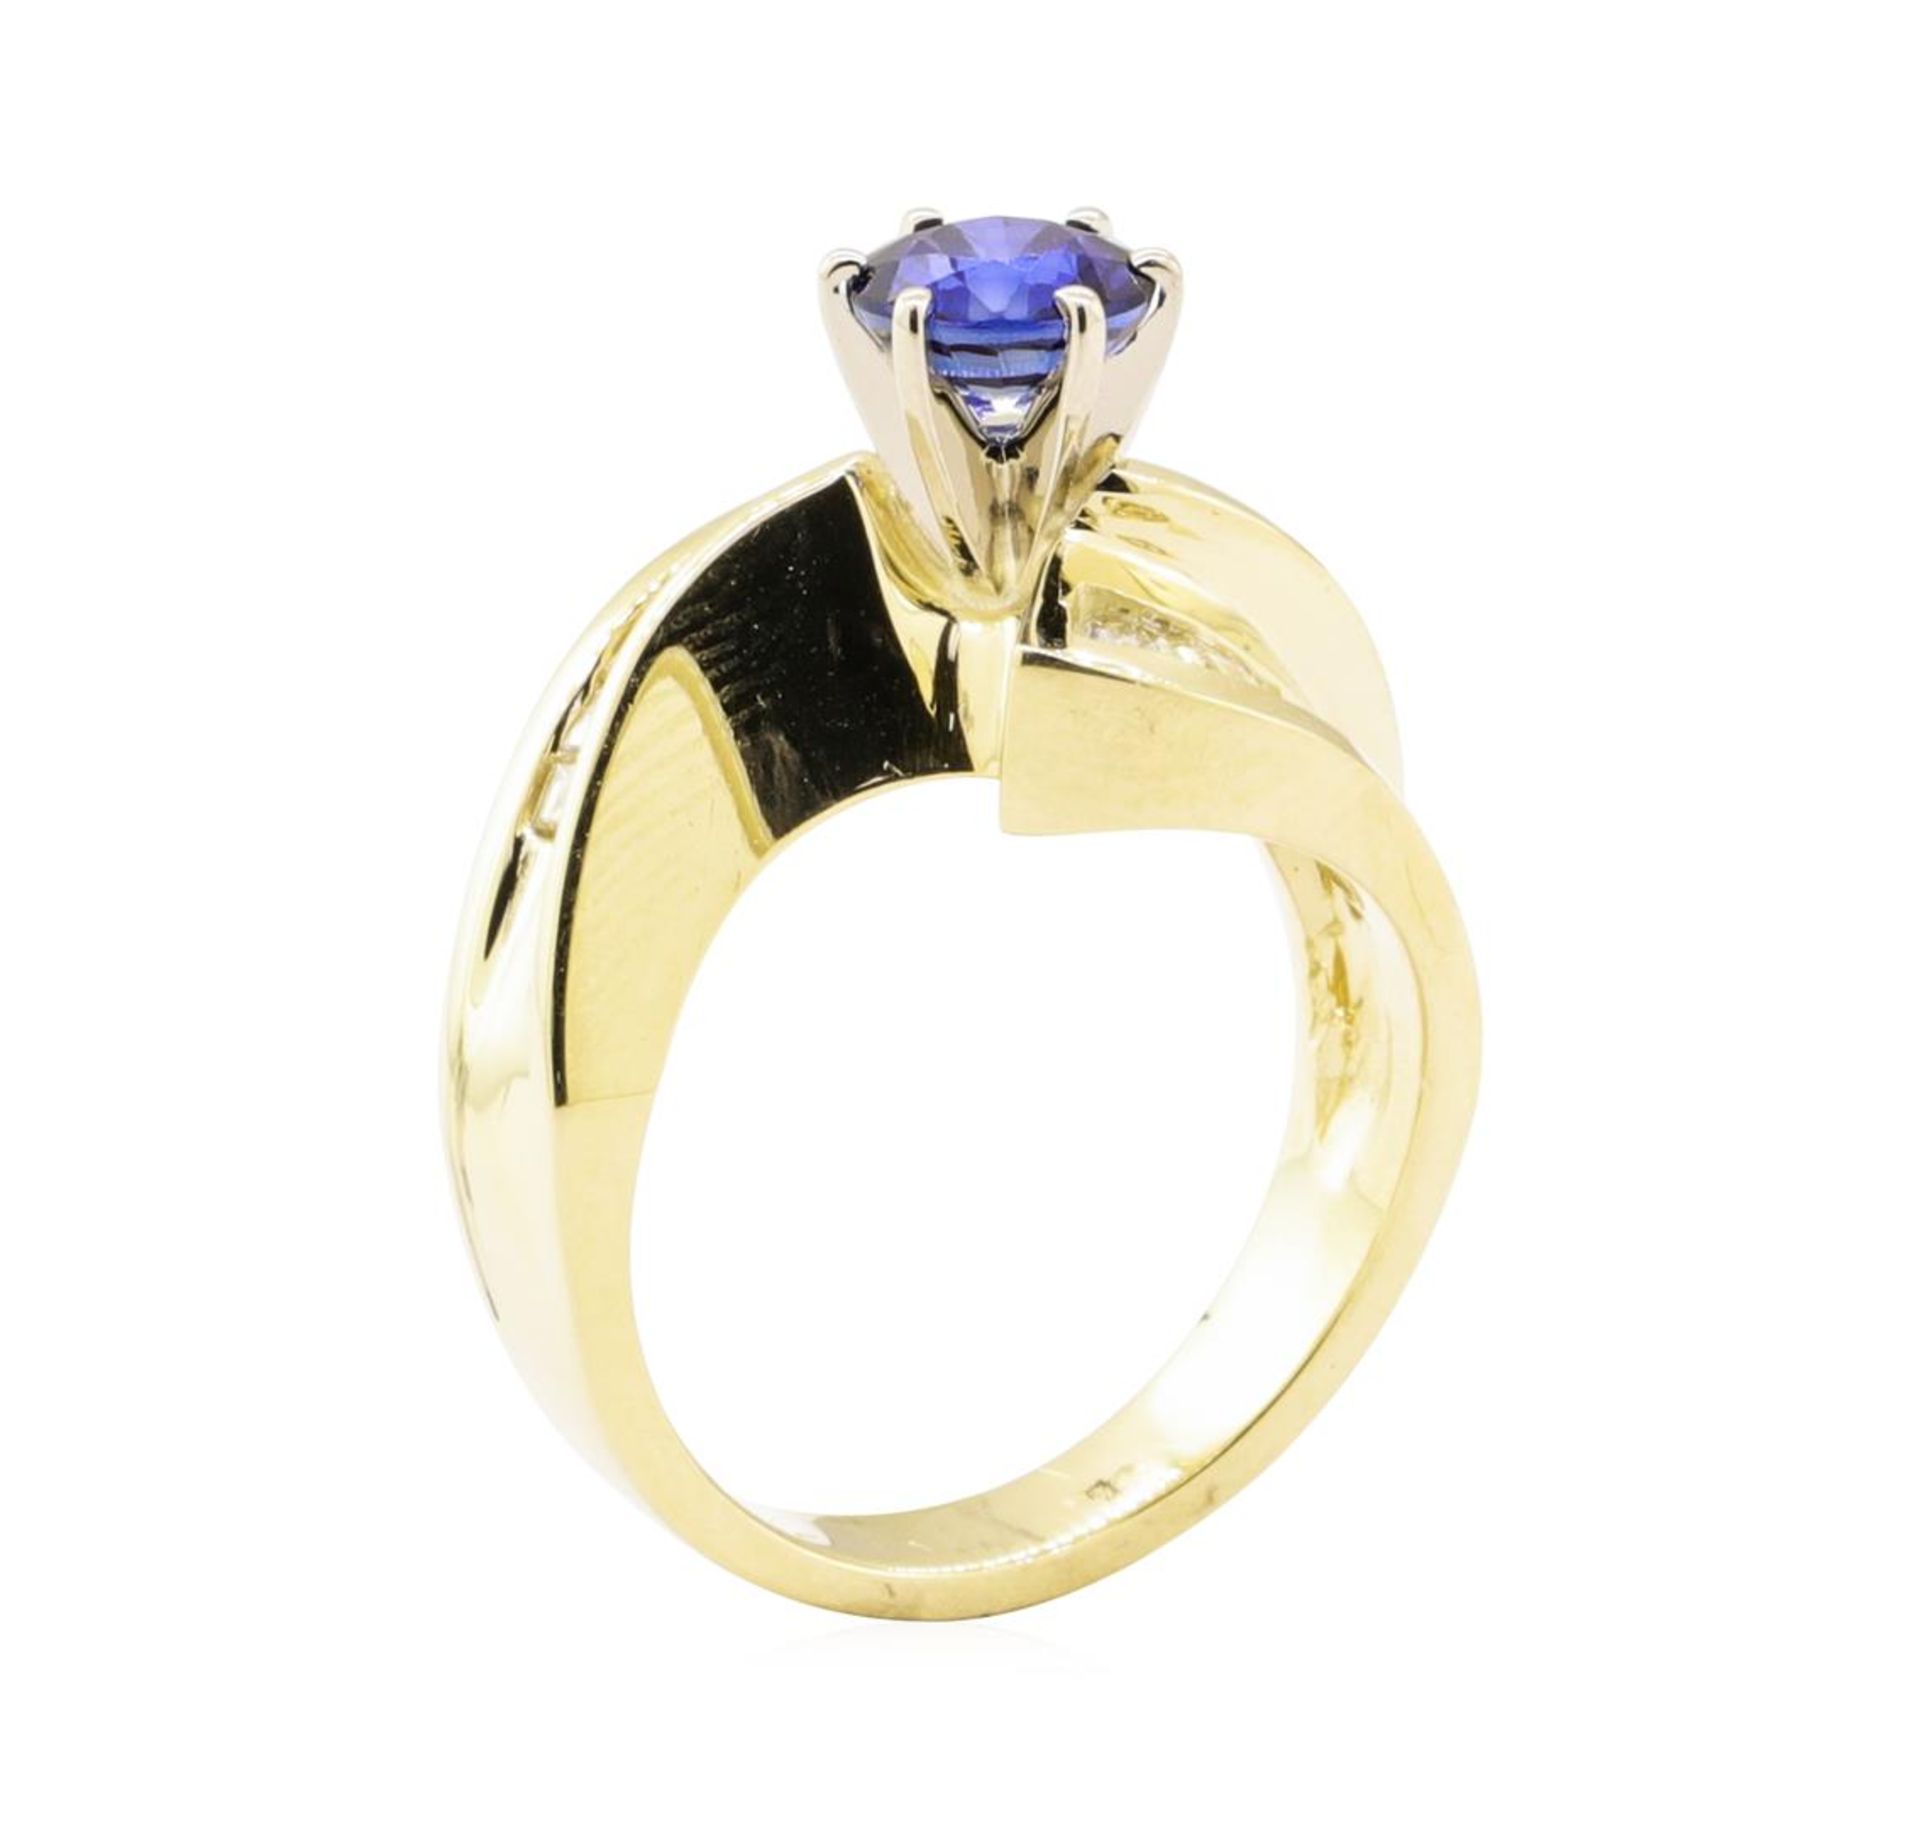 1.51 ctw Blue Sapphire And Diamond Ring - 14KT Yellow Gold - Image 4 of 5